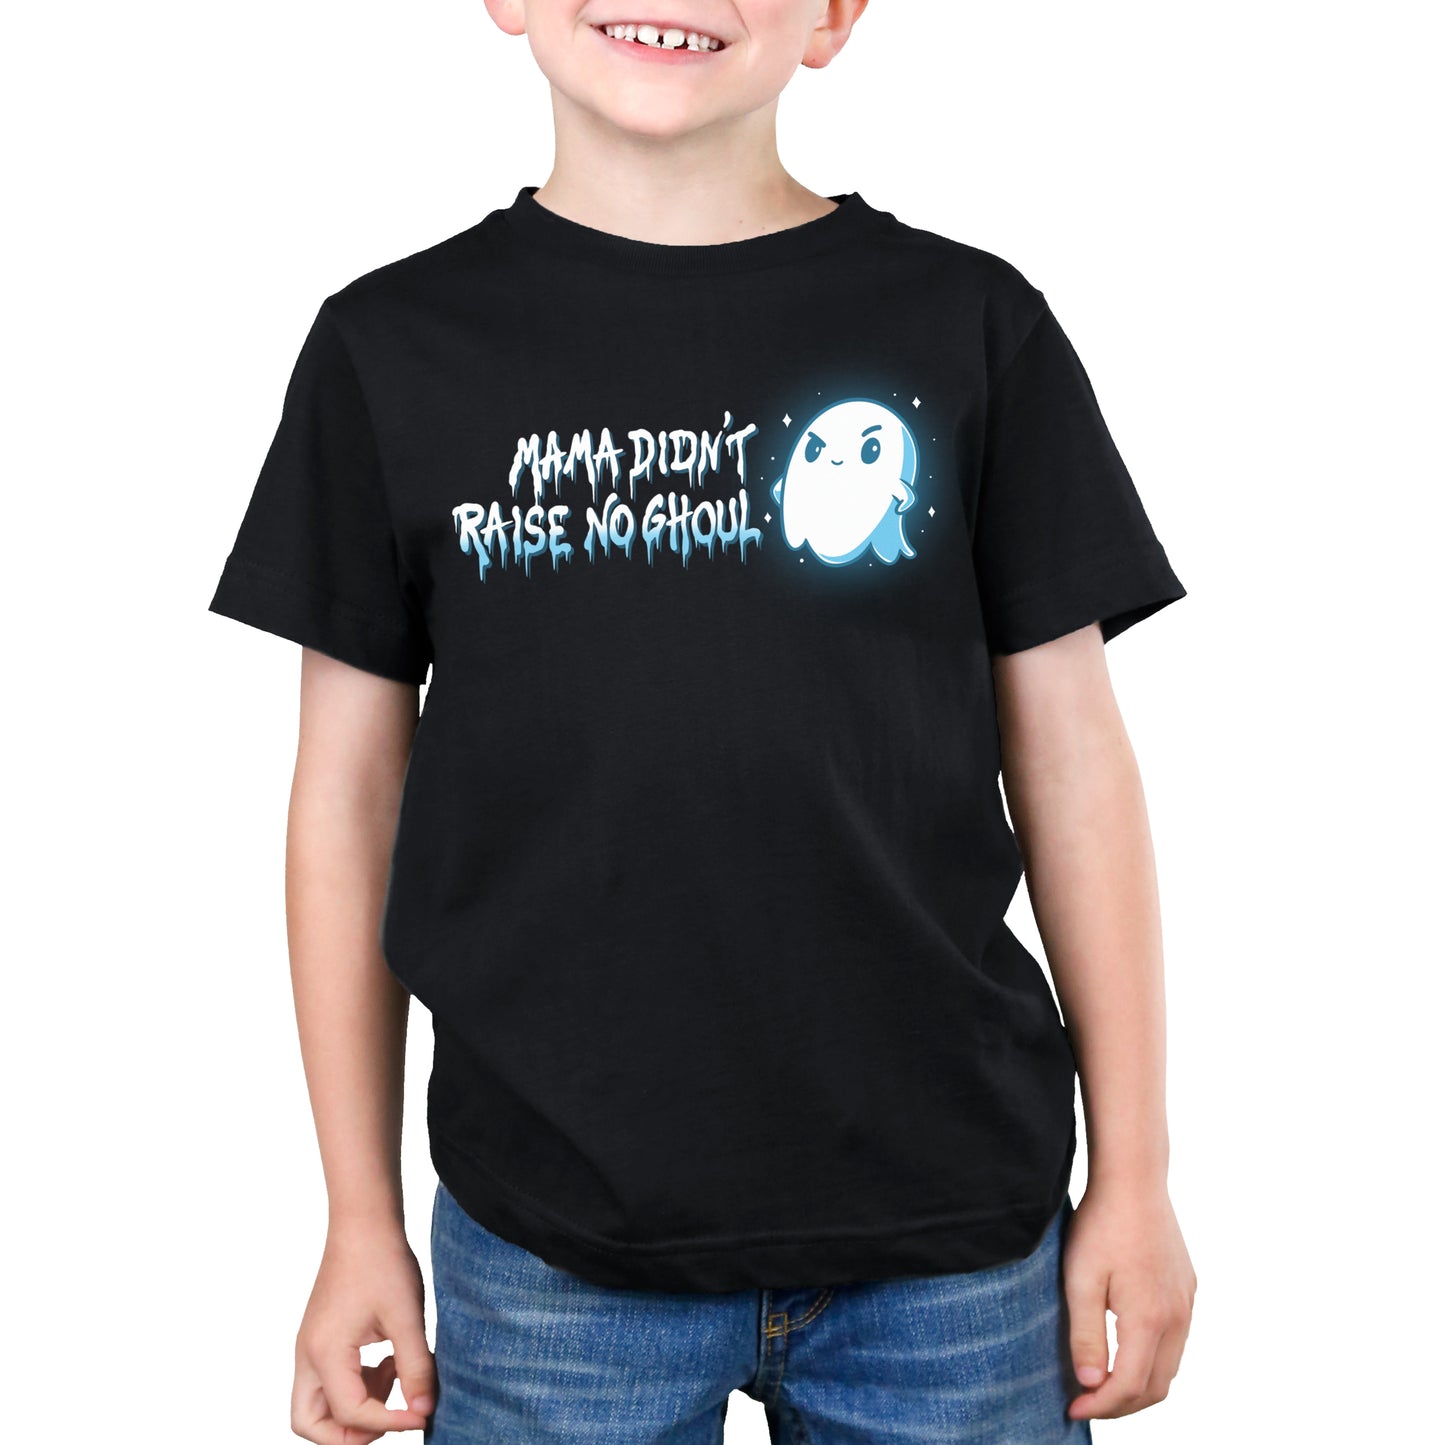 A young boy wearing a limited stock black TeeTurtle Mama Didn't Raise No Ghoul T-shirt that says 'trick or treat'.